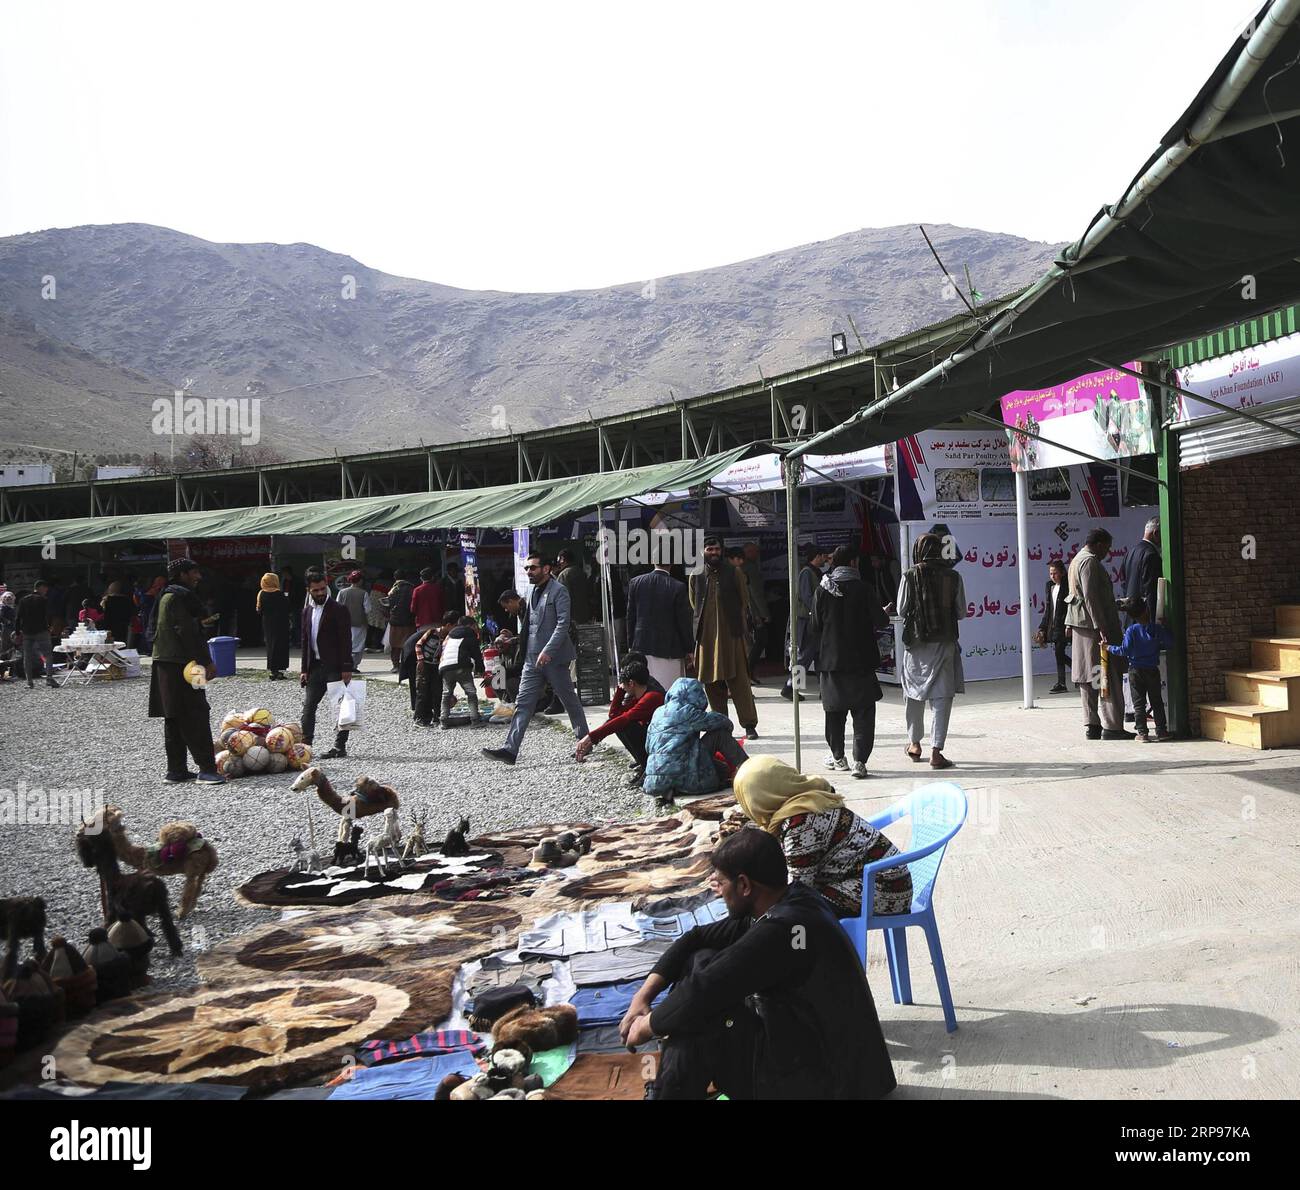 (190327) -- KABUL, March 27, 2019 -- People visit an agriculture and handicrafts exhibition in Kabul, Afghanistan, March 26, 2019. As part of its annual program to exhibit various domestic products, Afghanistan has held its 22nd agriculture and handicrafts exhibition in capital Kabul. The exhibition, which was held from March 22-26 at the Badam Bagh agriculture park, a garden in northern outskirts of Kabul city, was visited by thousands of people from around the country. ) AFGHANISTAN-KABUL-AGRICULTURE AND HANDICRAFTS EXHIBITION RahmatxAlizadah PUBLICATIONxNOTxINxCHN Stock Photo